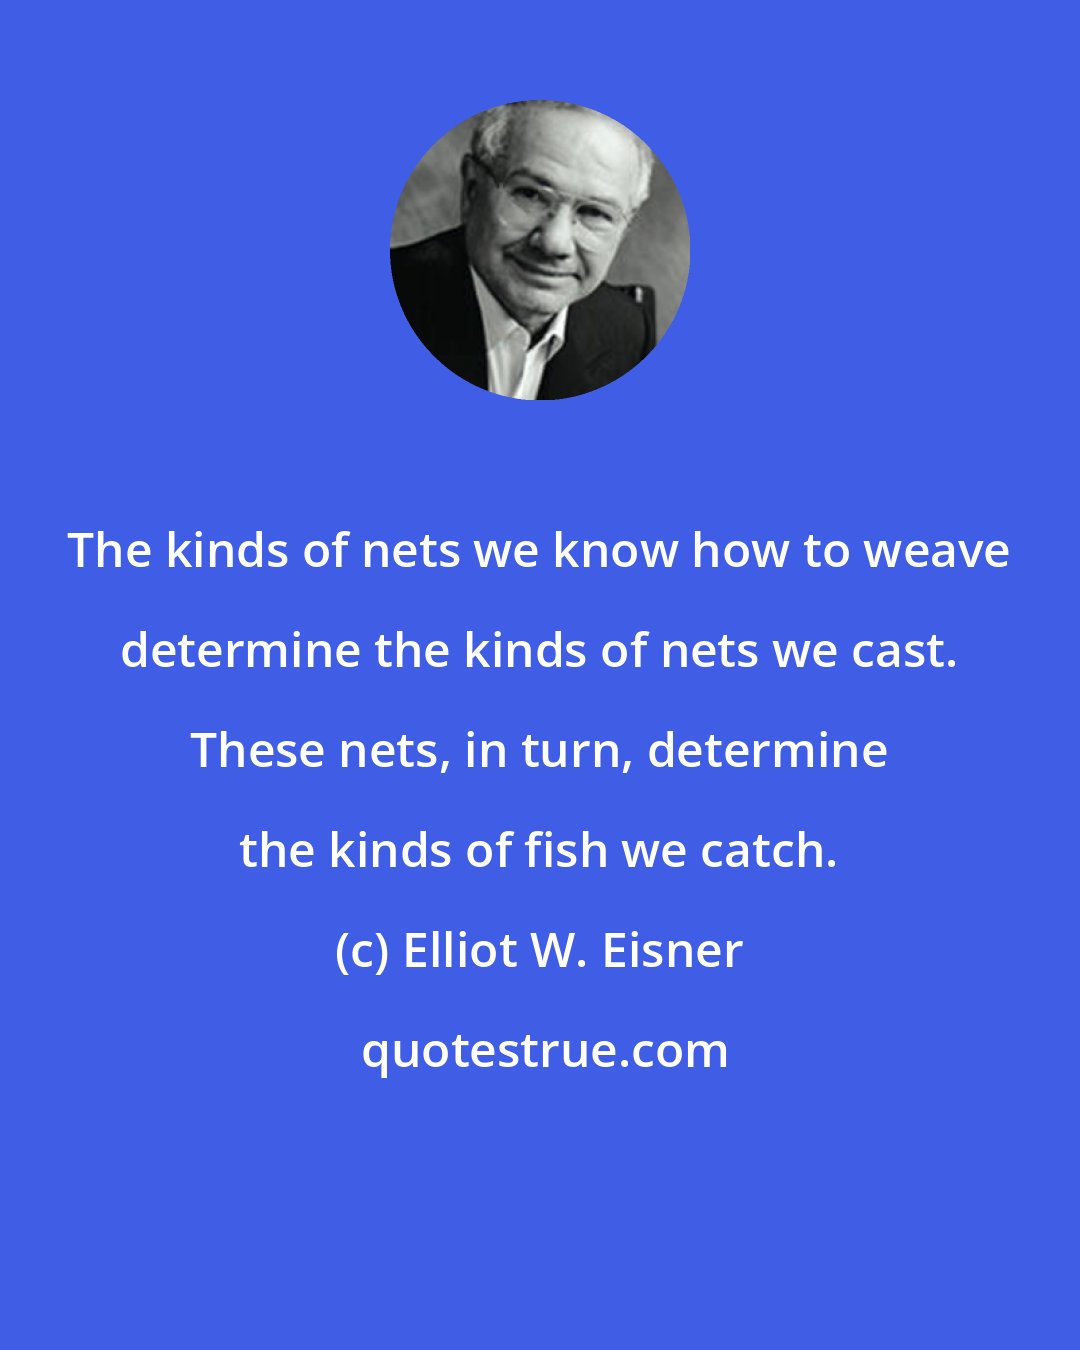 Elliot W. Eisner: The kinds of nets we know how to weave determine the kinds of nets we cast. These nets, in turn, determine the kinds of fish we catch.